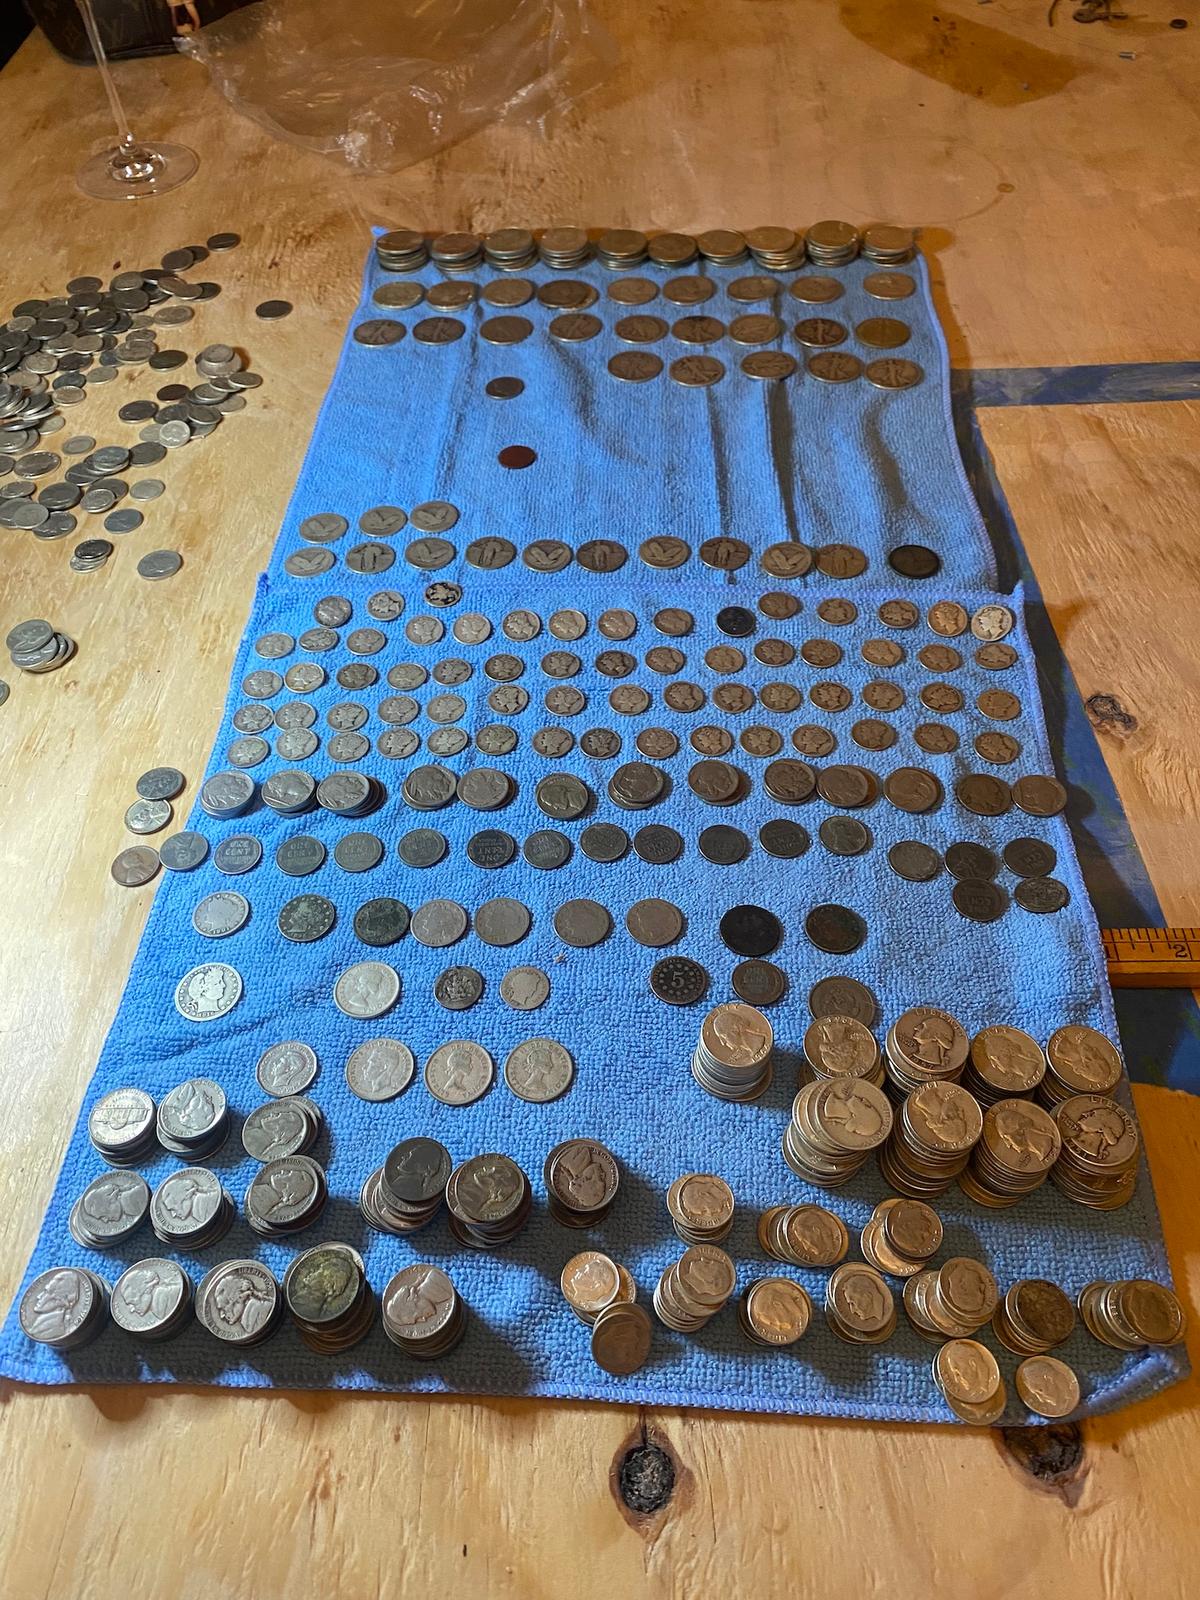 Some of the coins the Kraskneskys have found in the manor. (Courtesy of Krasnesky <a href="https://www.facebook.com/profile.php?id=100076974185503">Manor for Wayward Cats</a>)